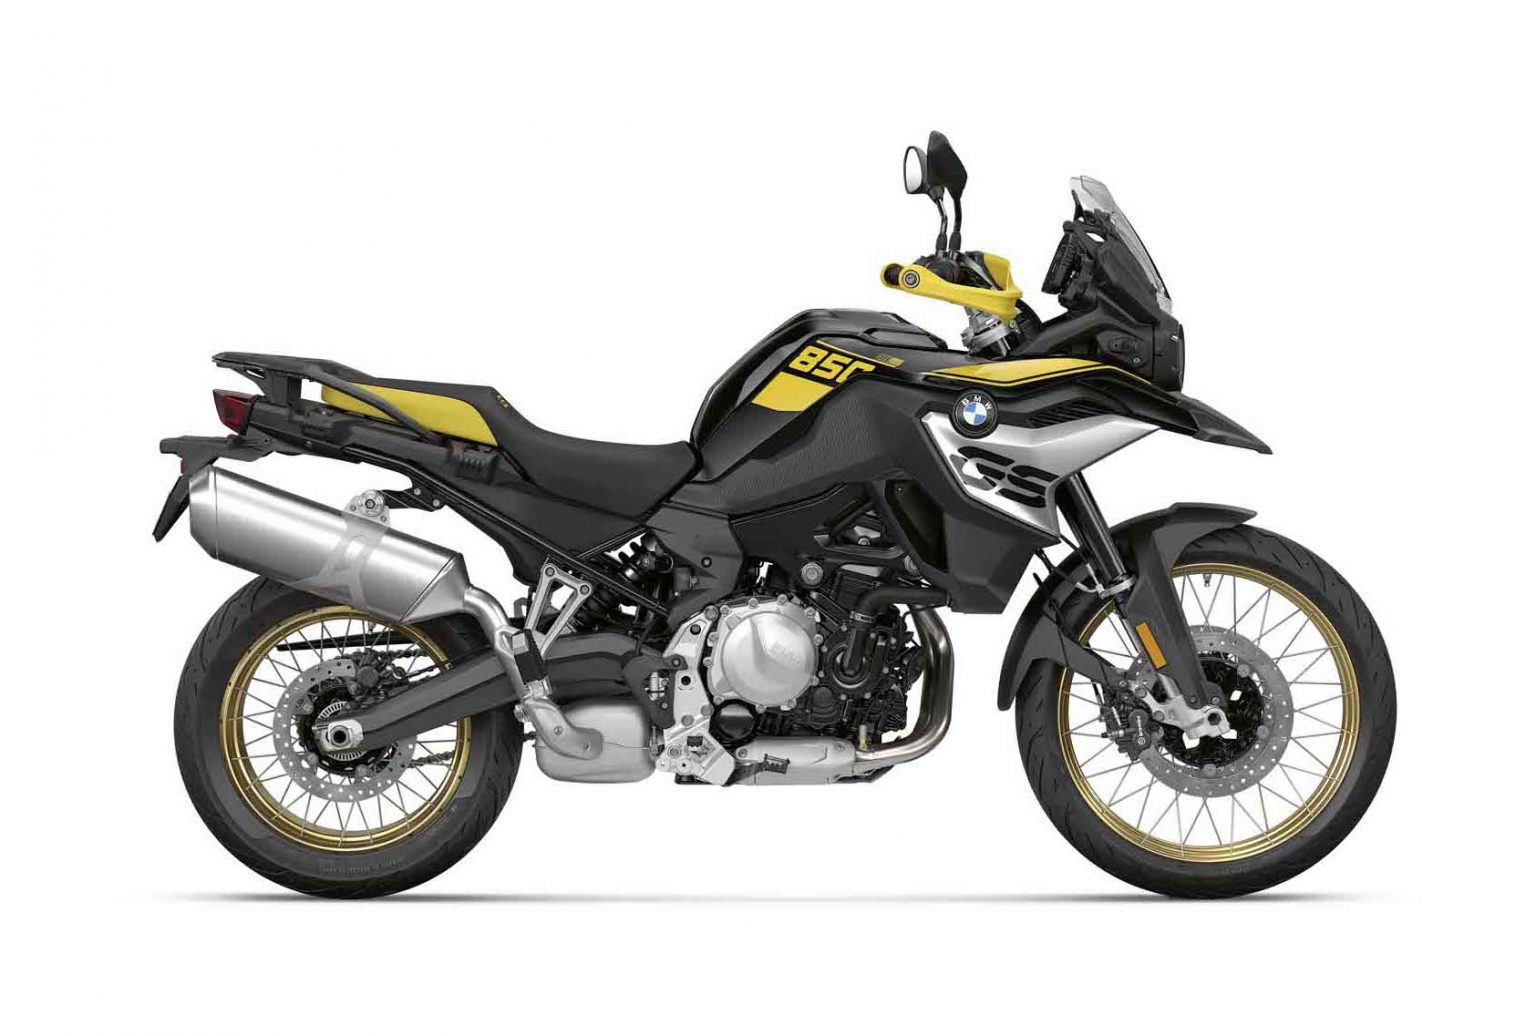 BMW F 850 GS “40 Years GS Edition” Debuts Locally - Automacha